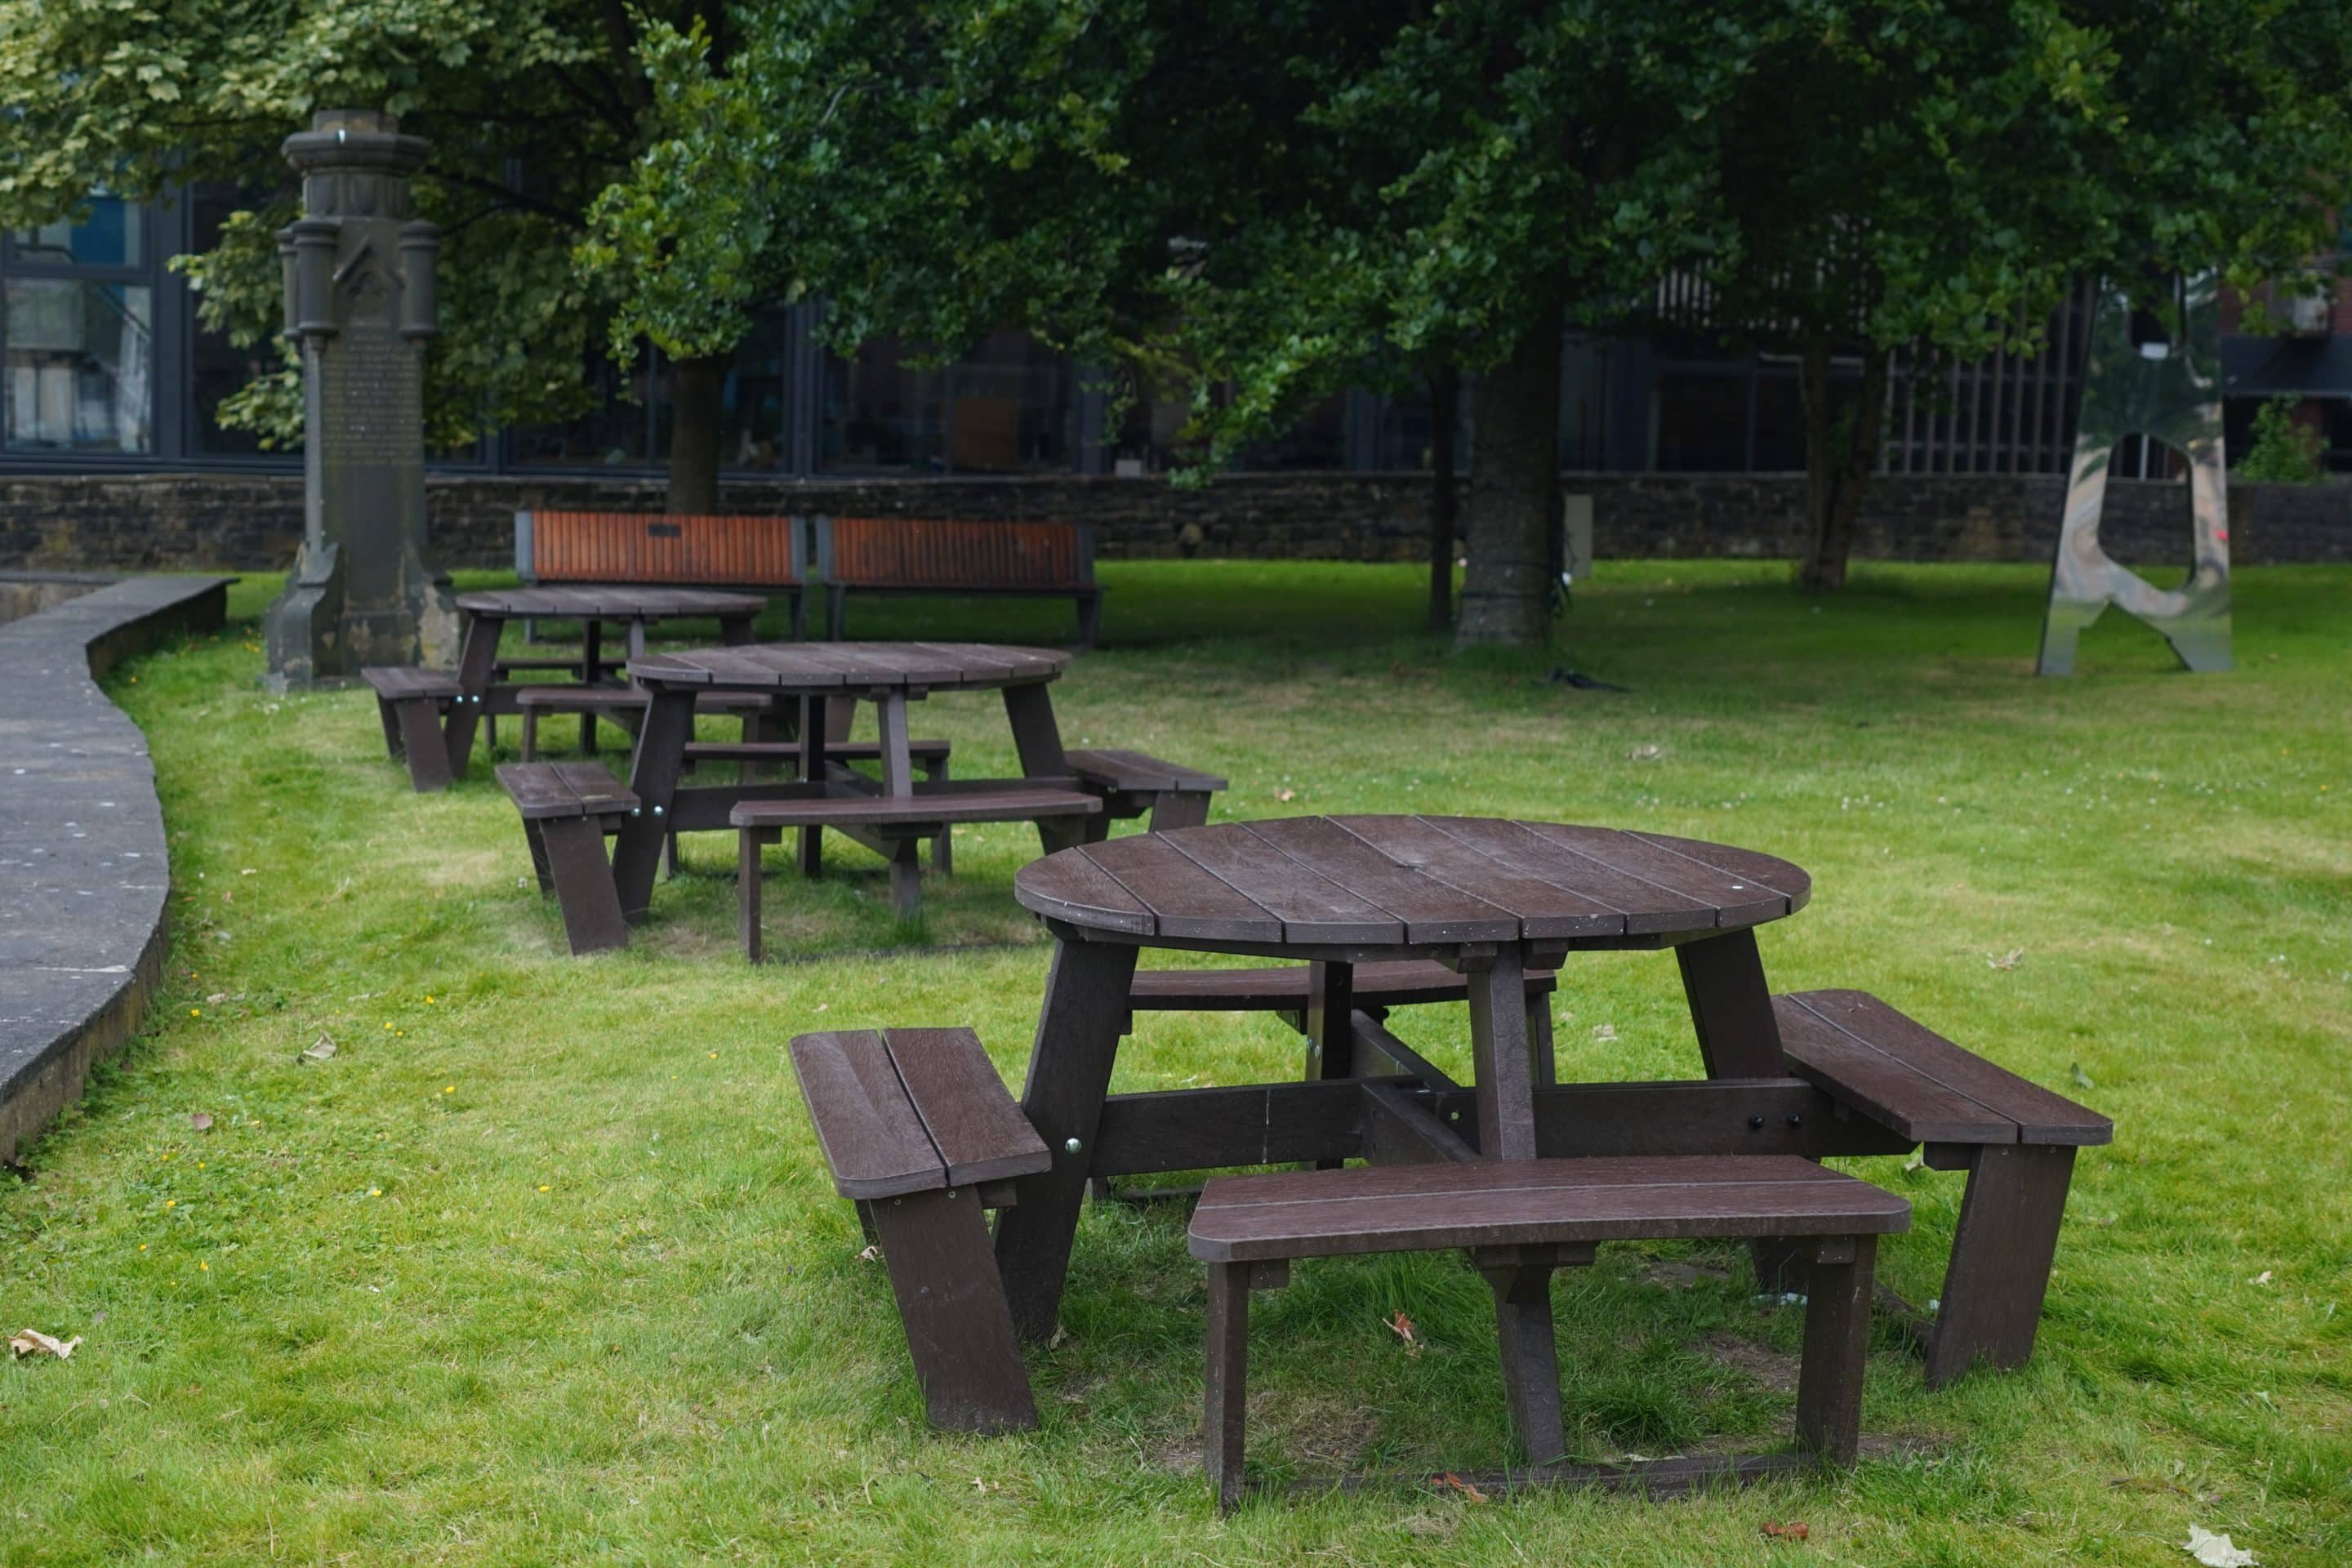 Calder 8 seater recycled picnic table from British Recycled Plastic